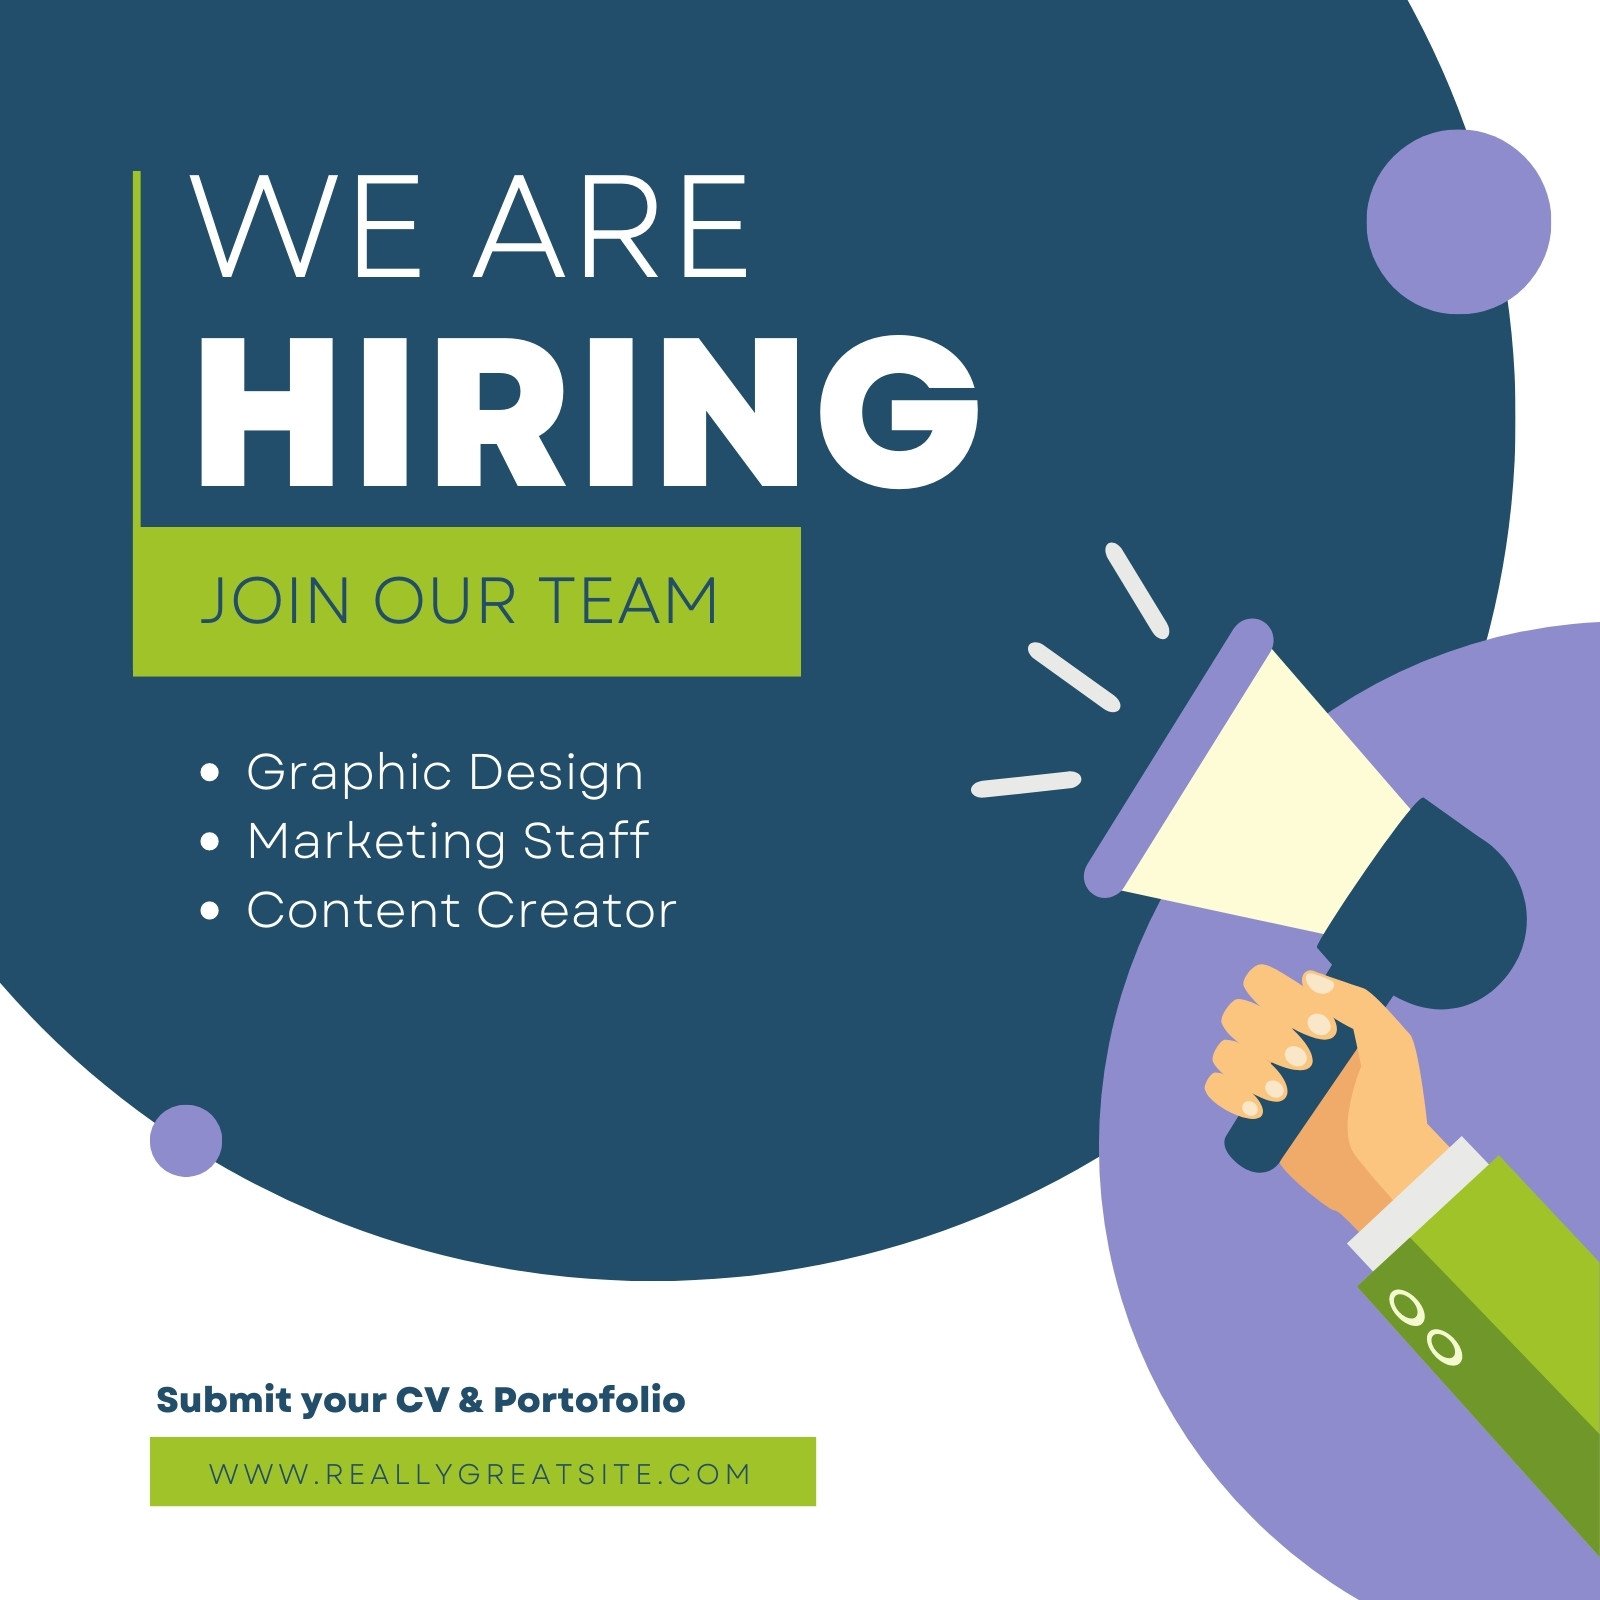 We Are Hiring Poster Template